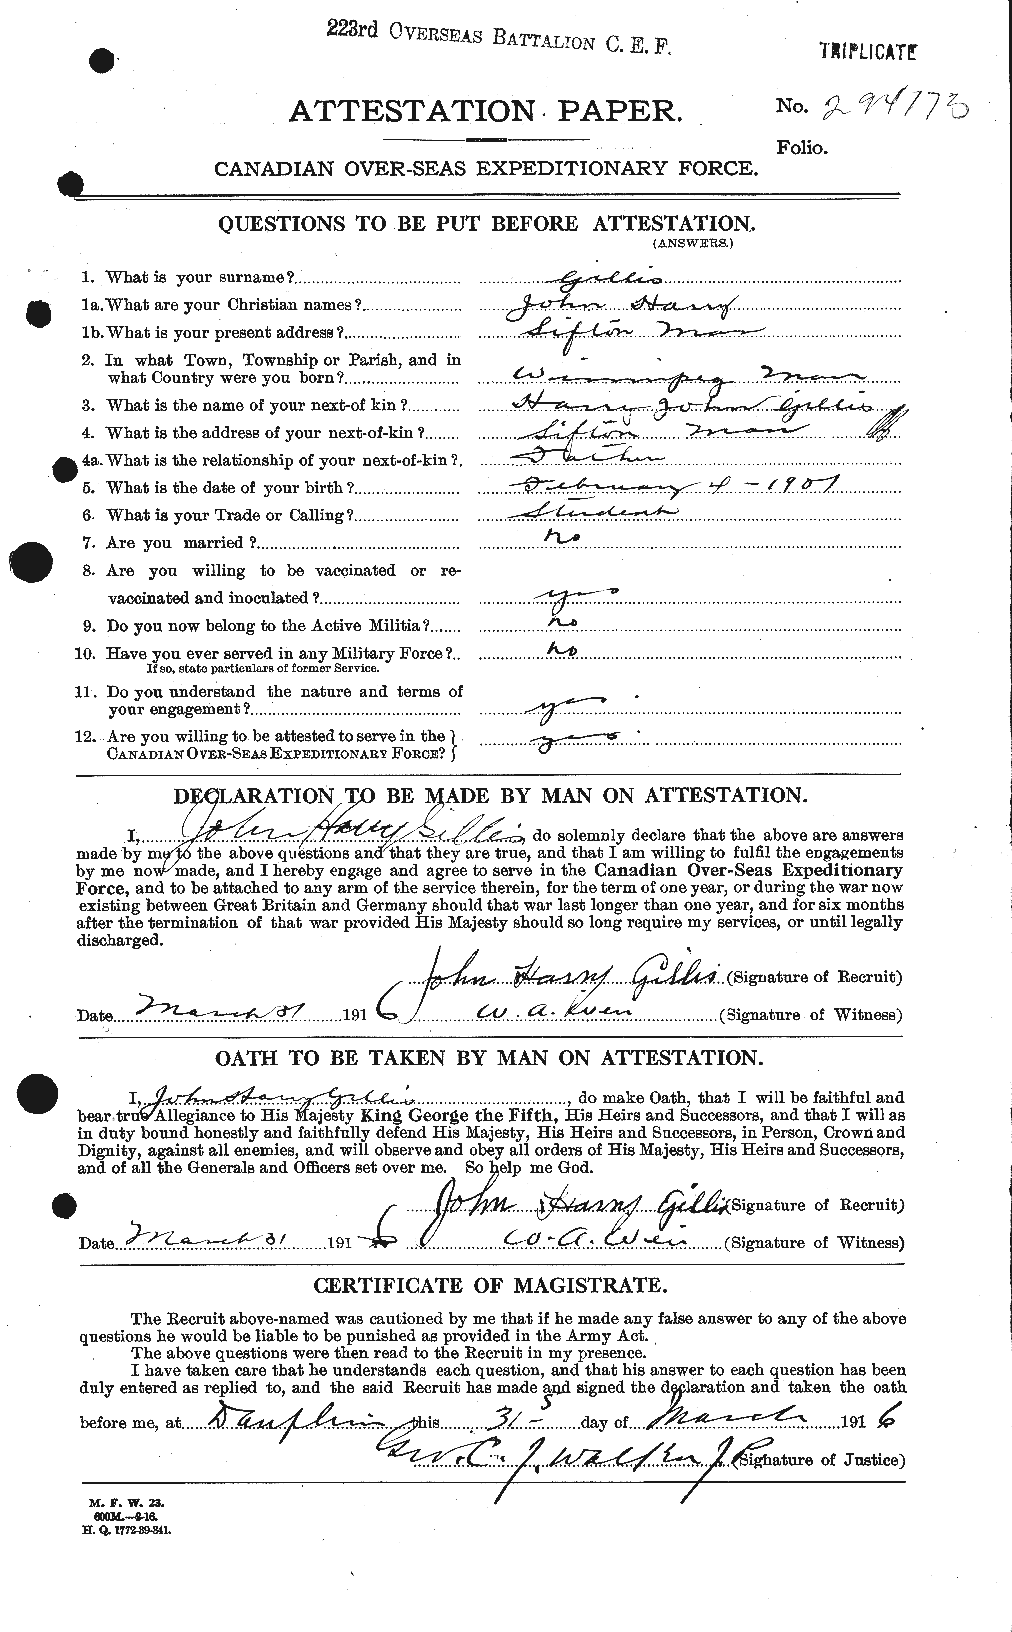 Personnel Records of the First World War - CEF 348065a